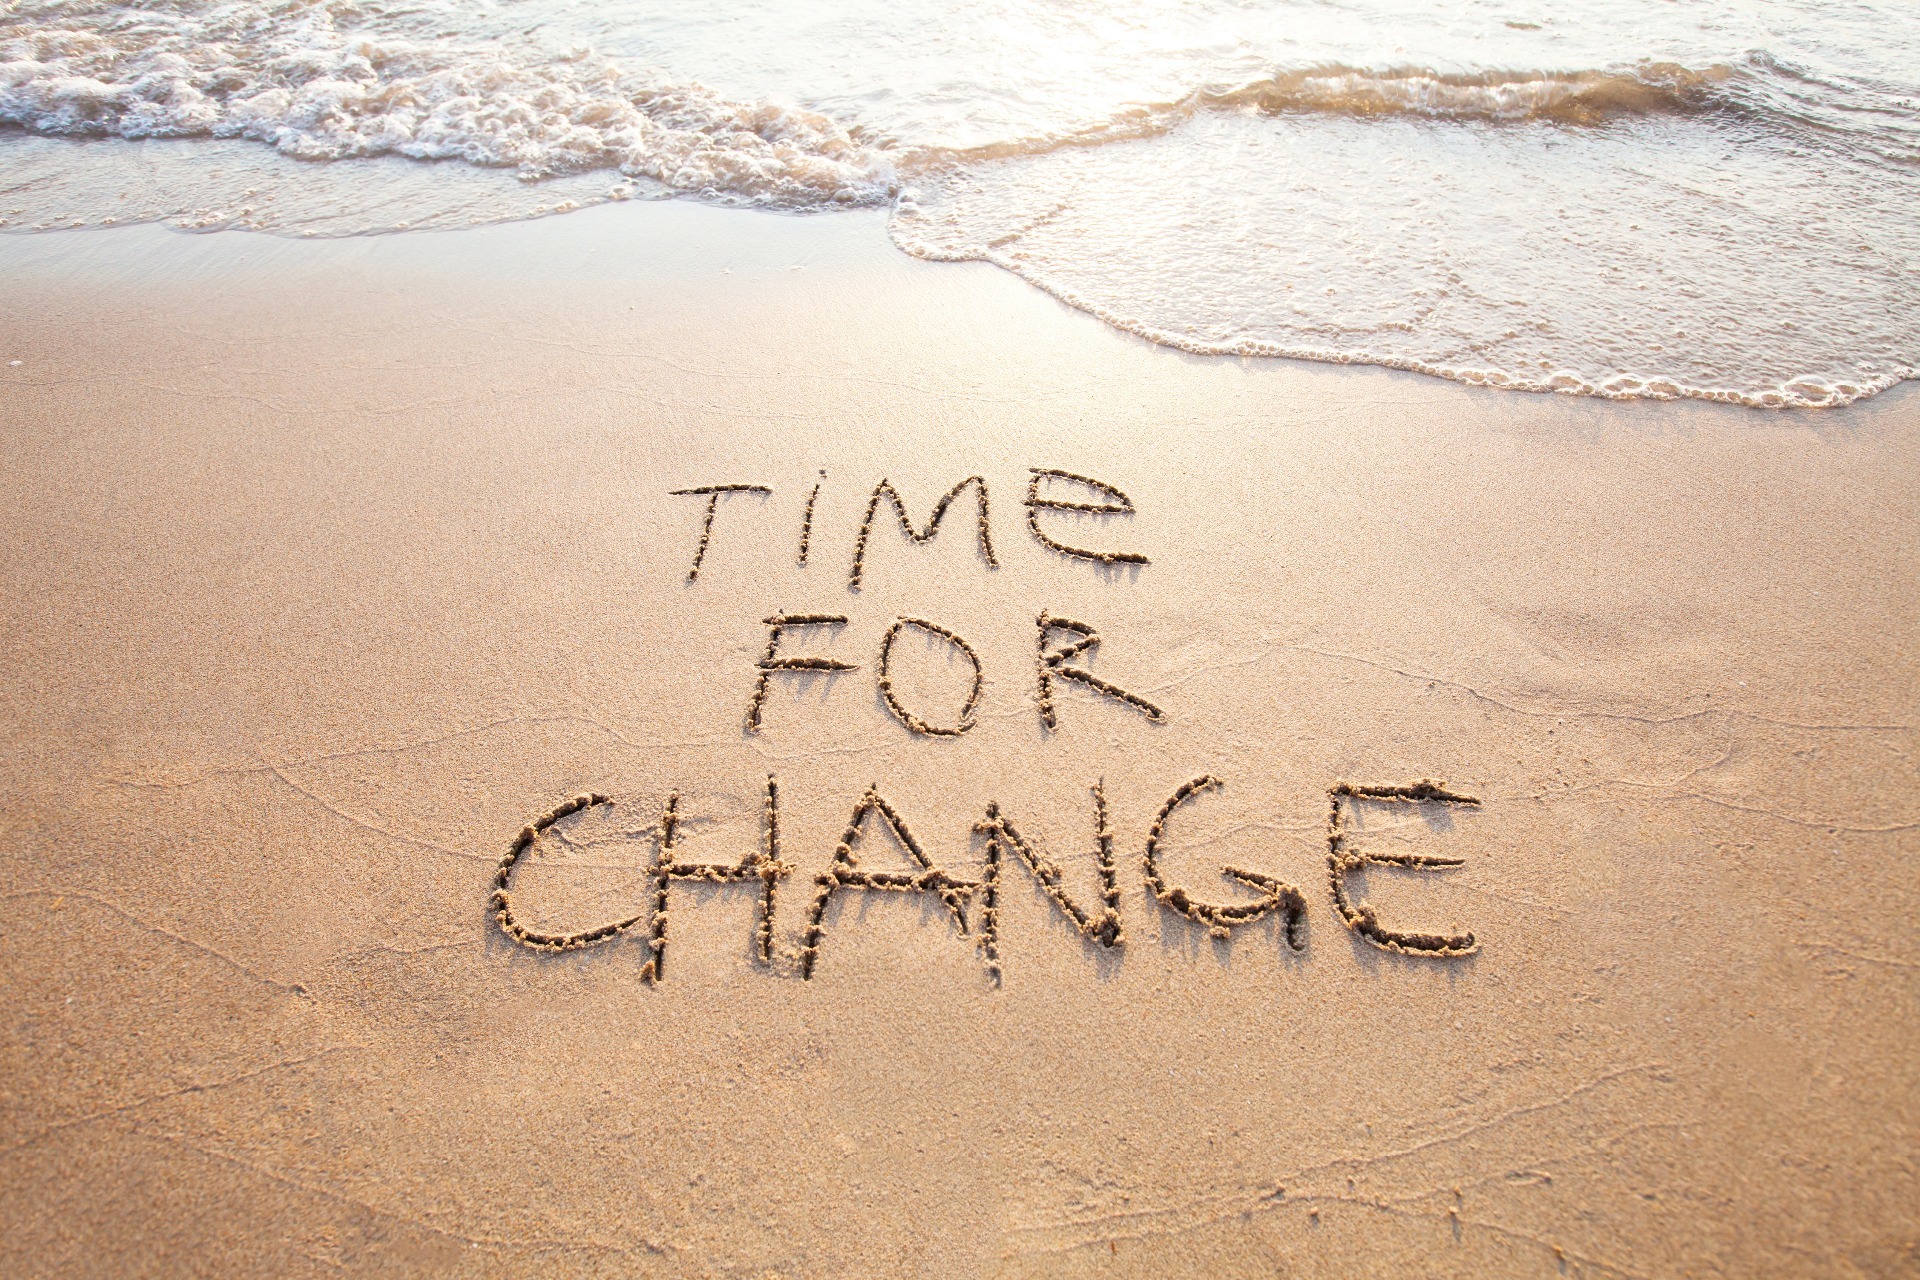 "Time for Change" written in the sand of a beach; our Wills Solicitors page, which can be viewed by clicking this image, discuss when to update your Will, and how we can assist.